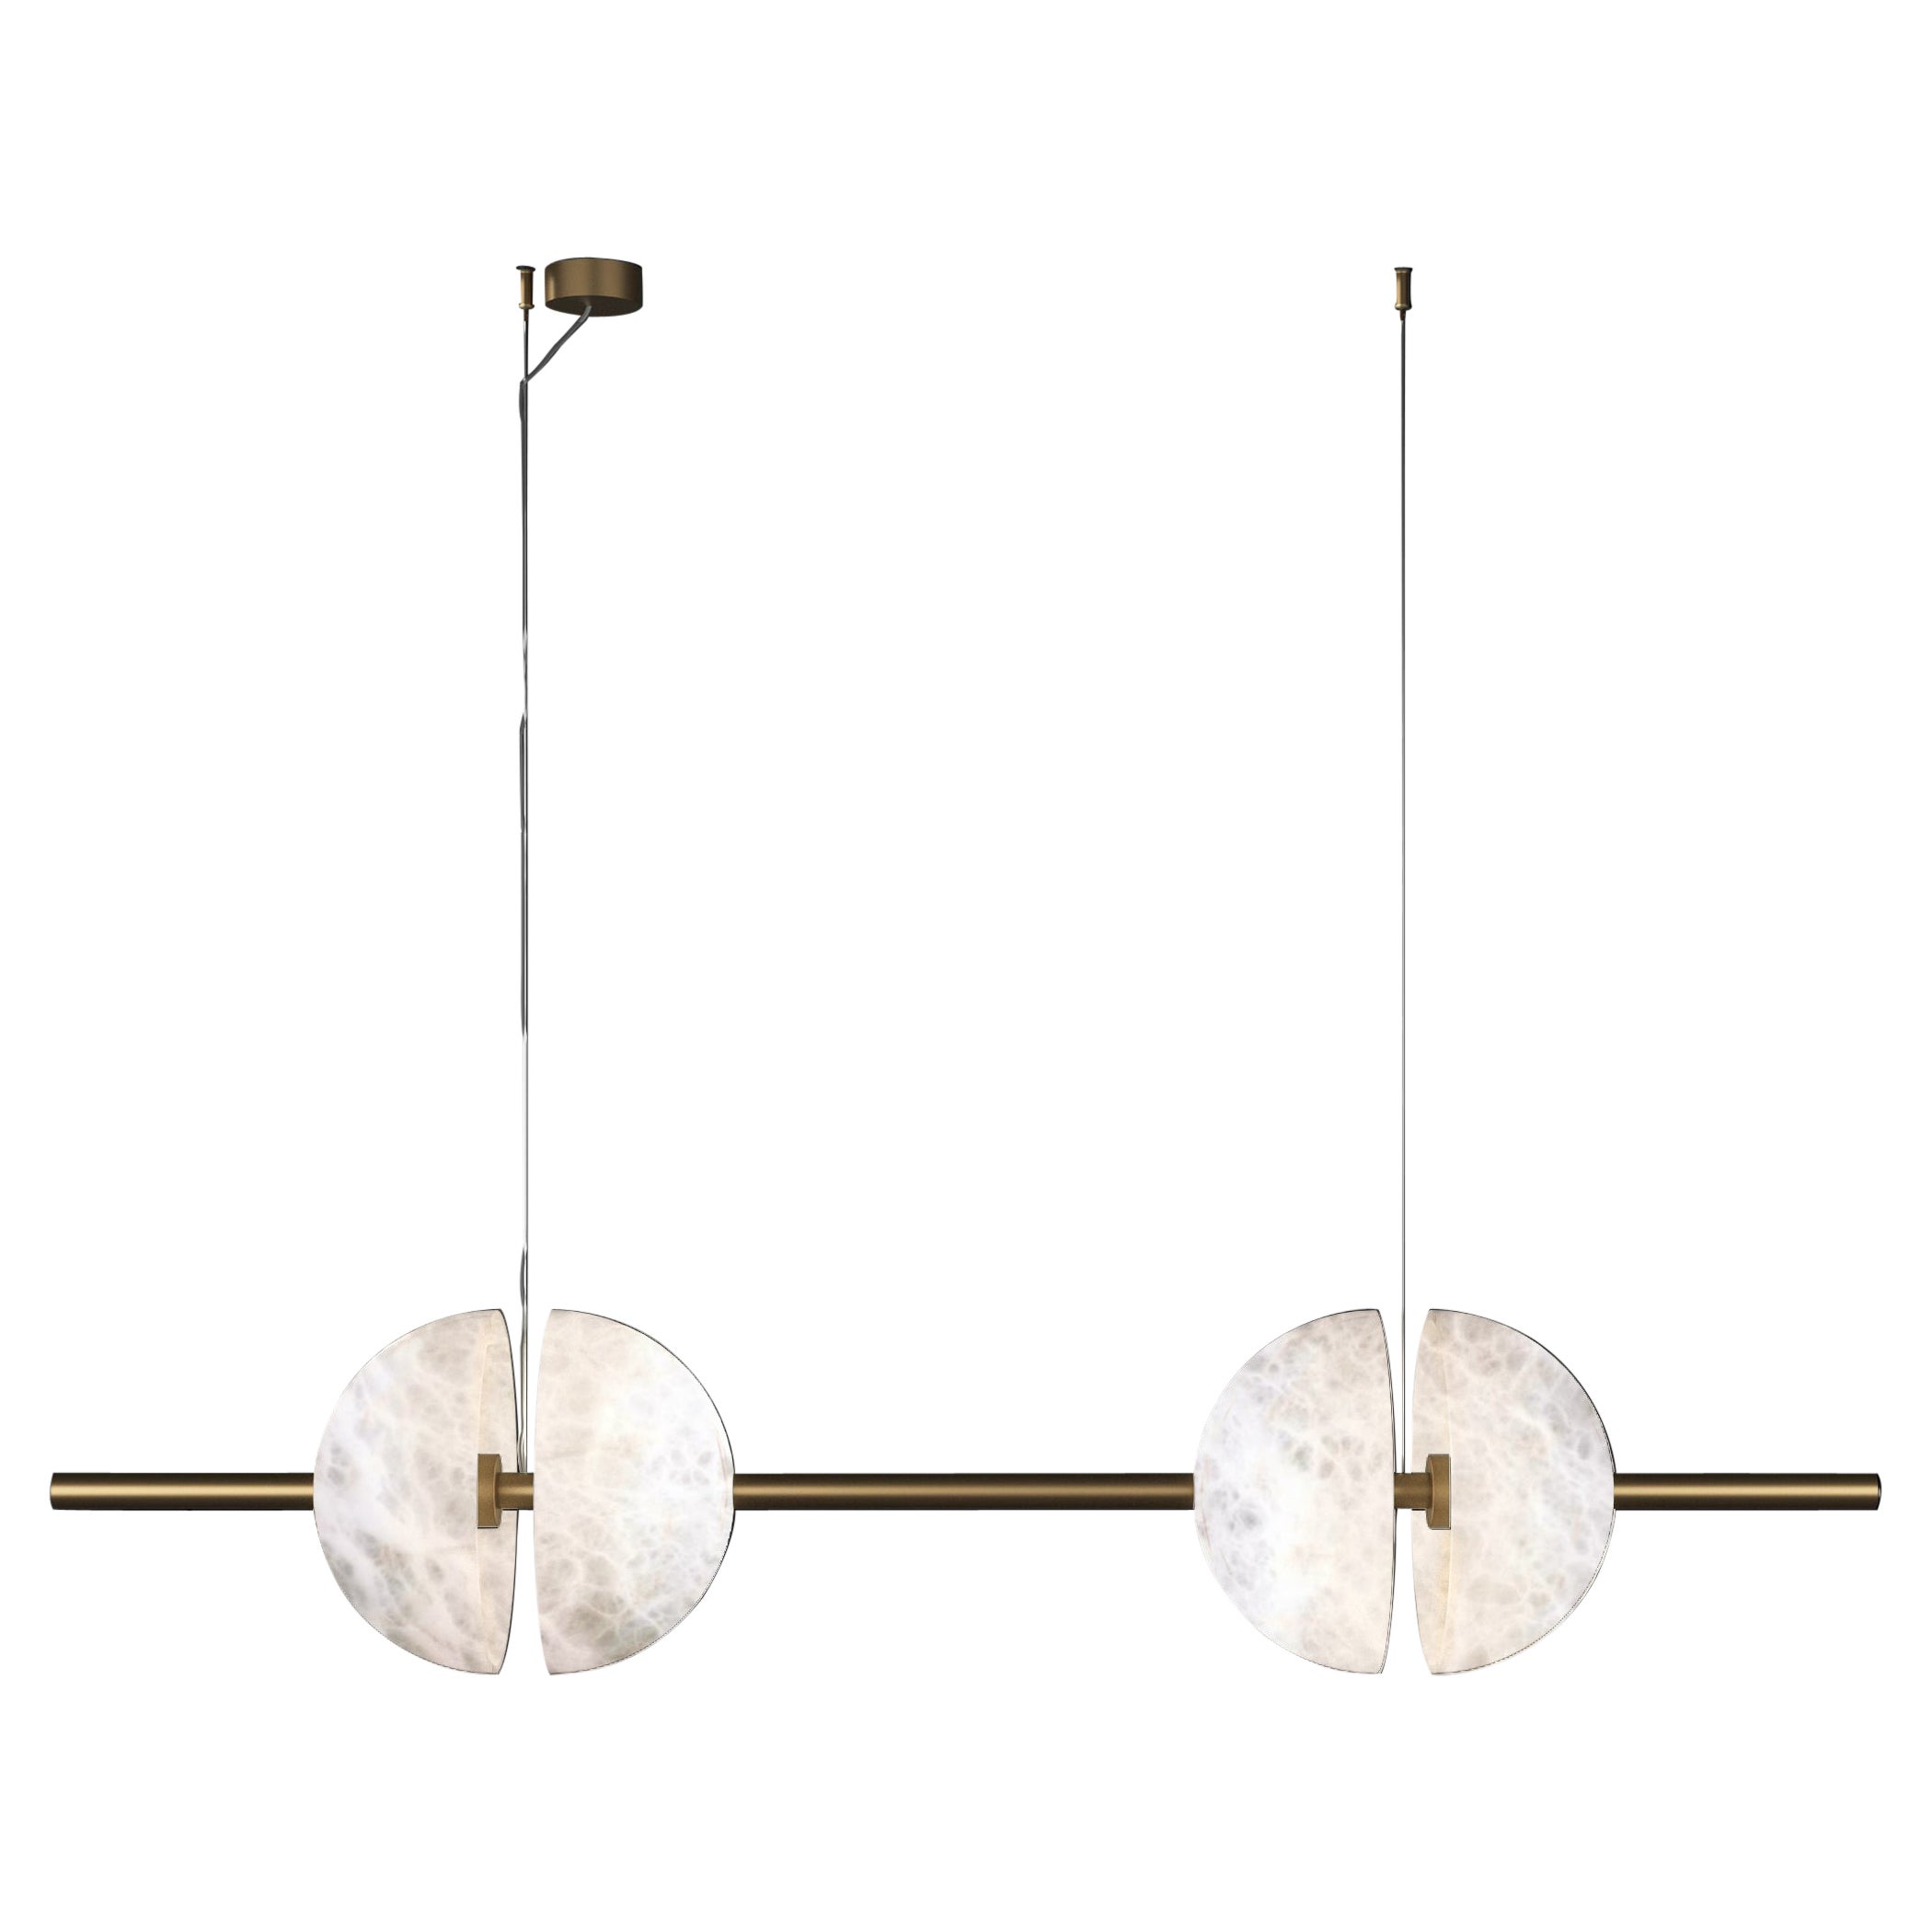 Ermes Bronze And Alabaster Pendant Light 1 by Alabastro Italiano For Sale